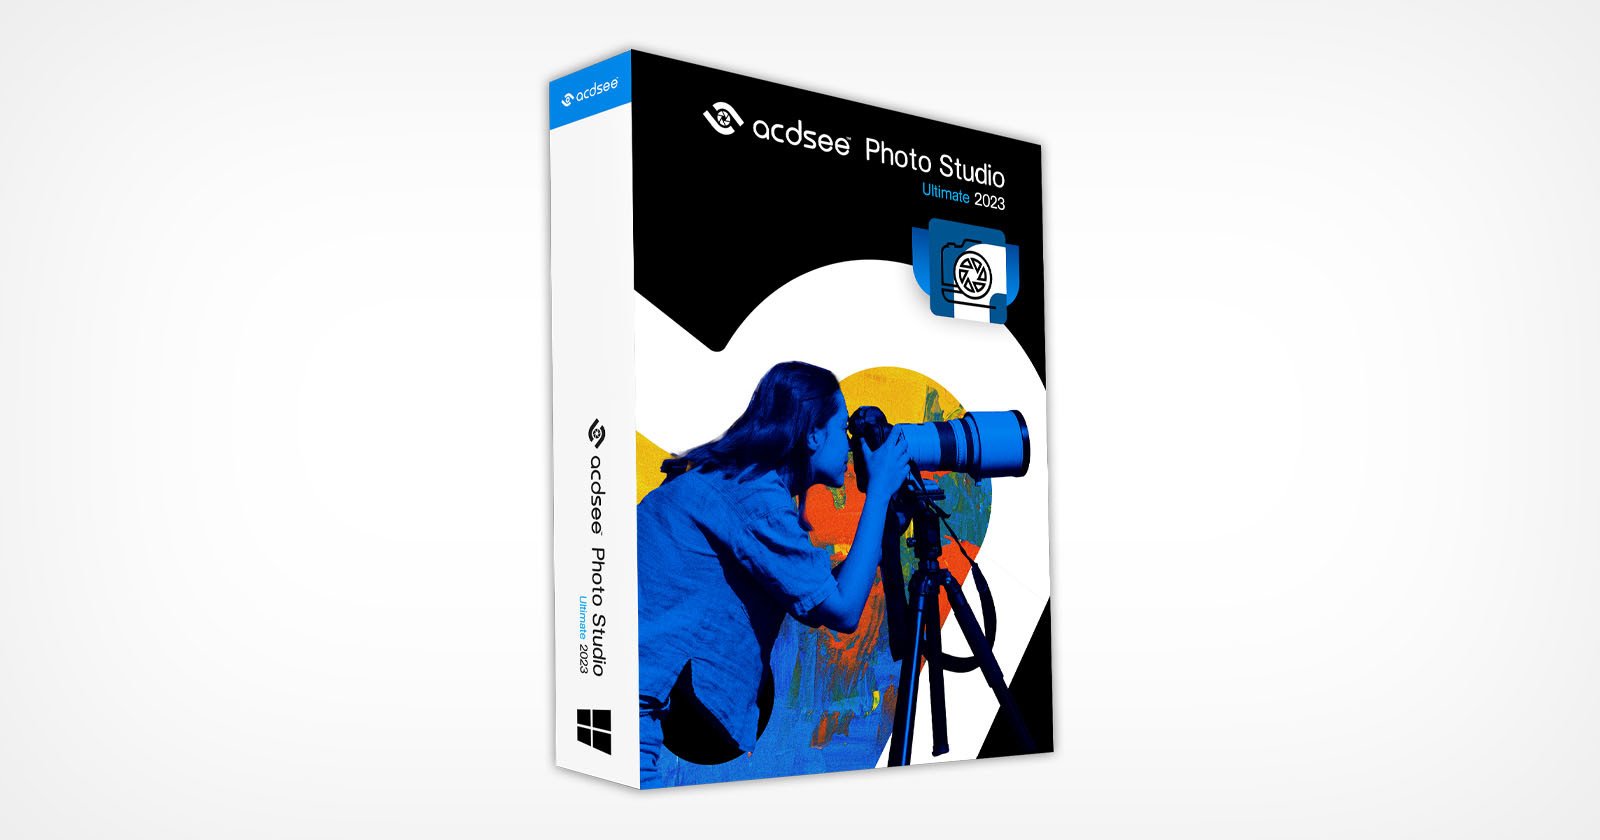  acdsee photo studio ultimate now lets edit 